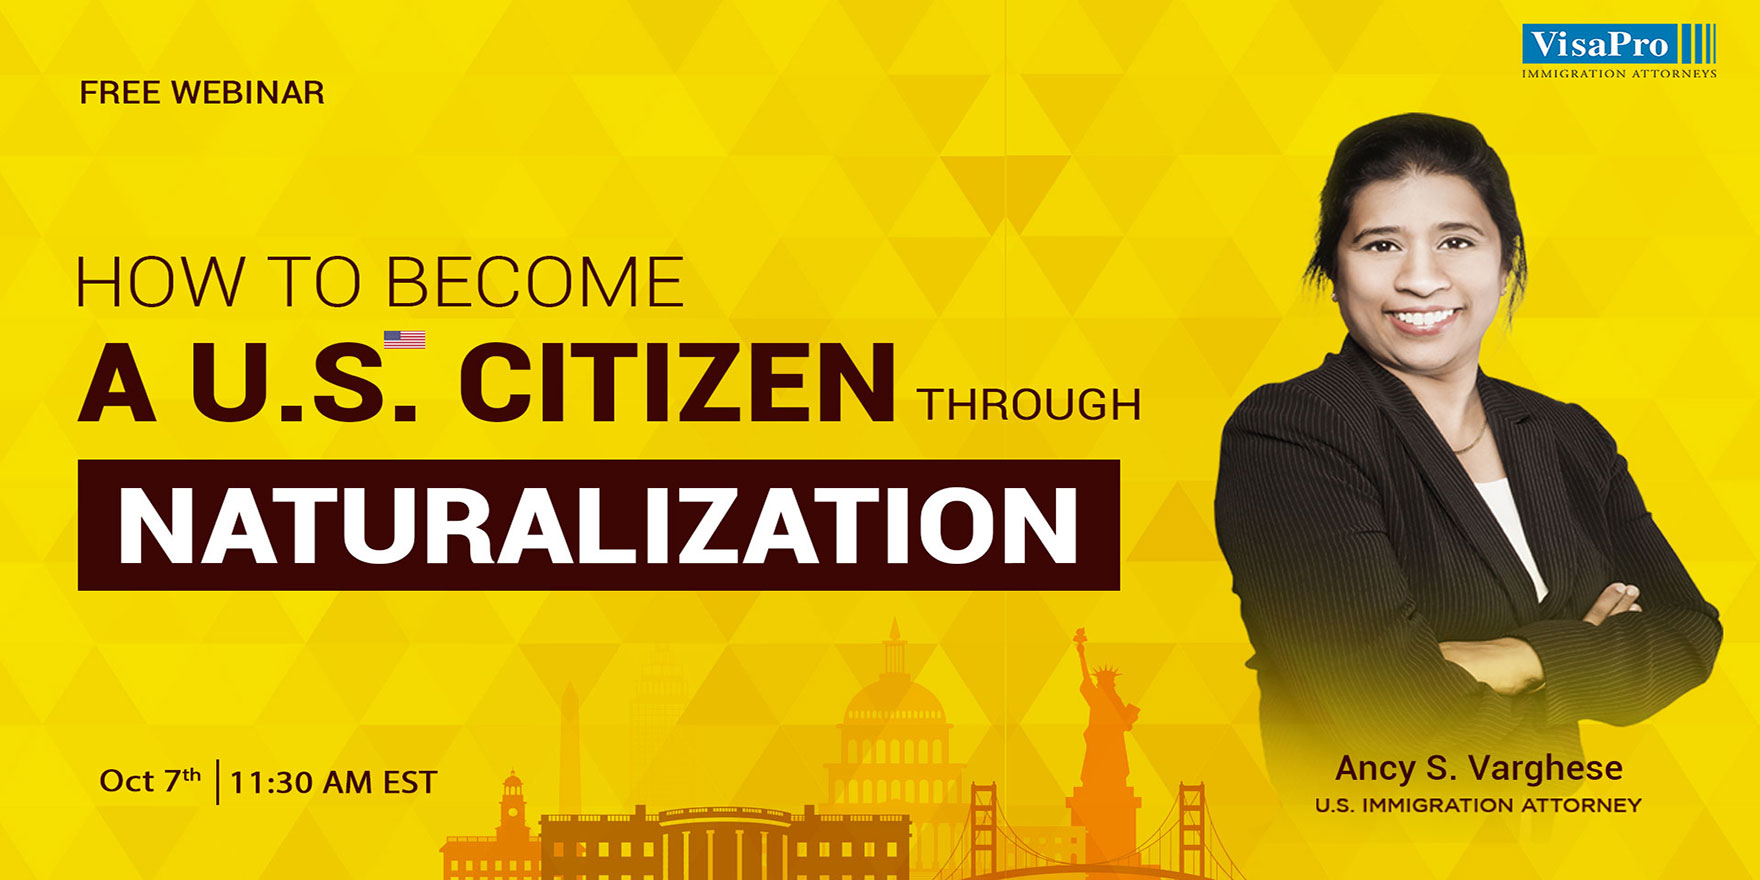 How To Become A U.S. Citizen Through Naturalization, Chicago, Illinois, United States